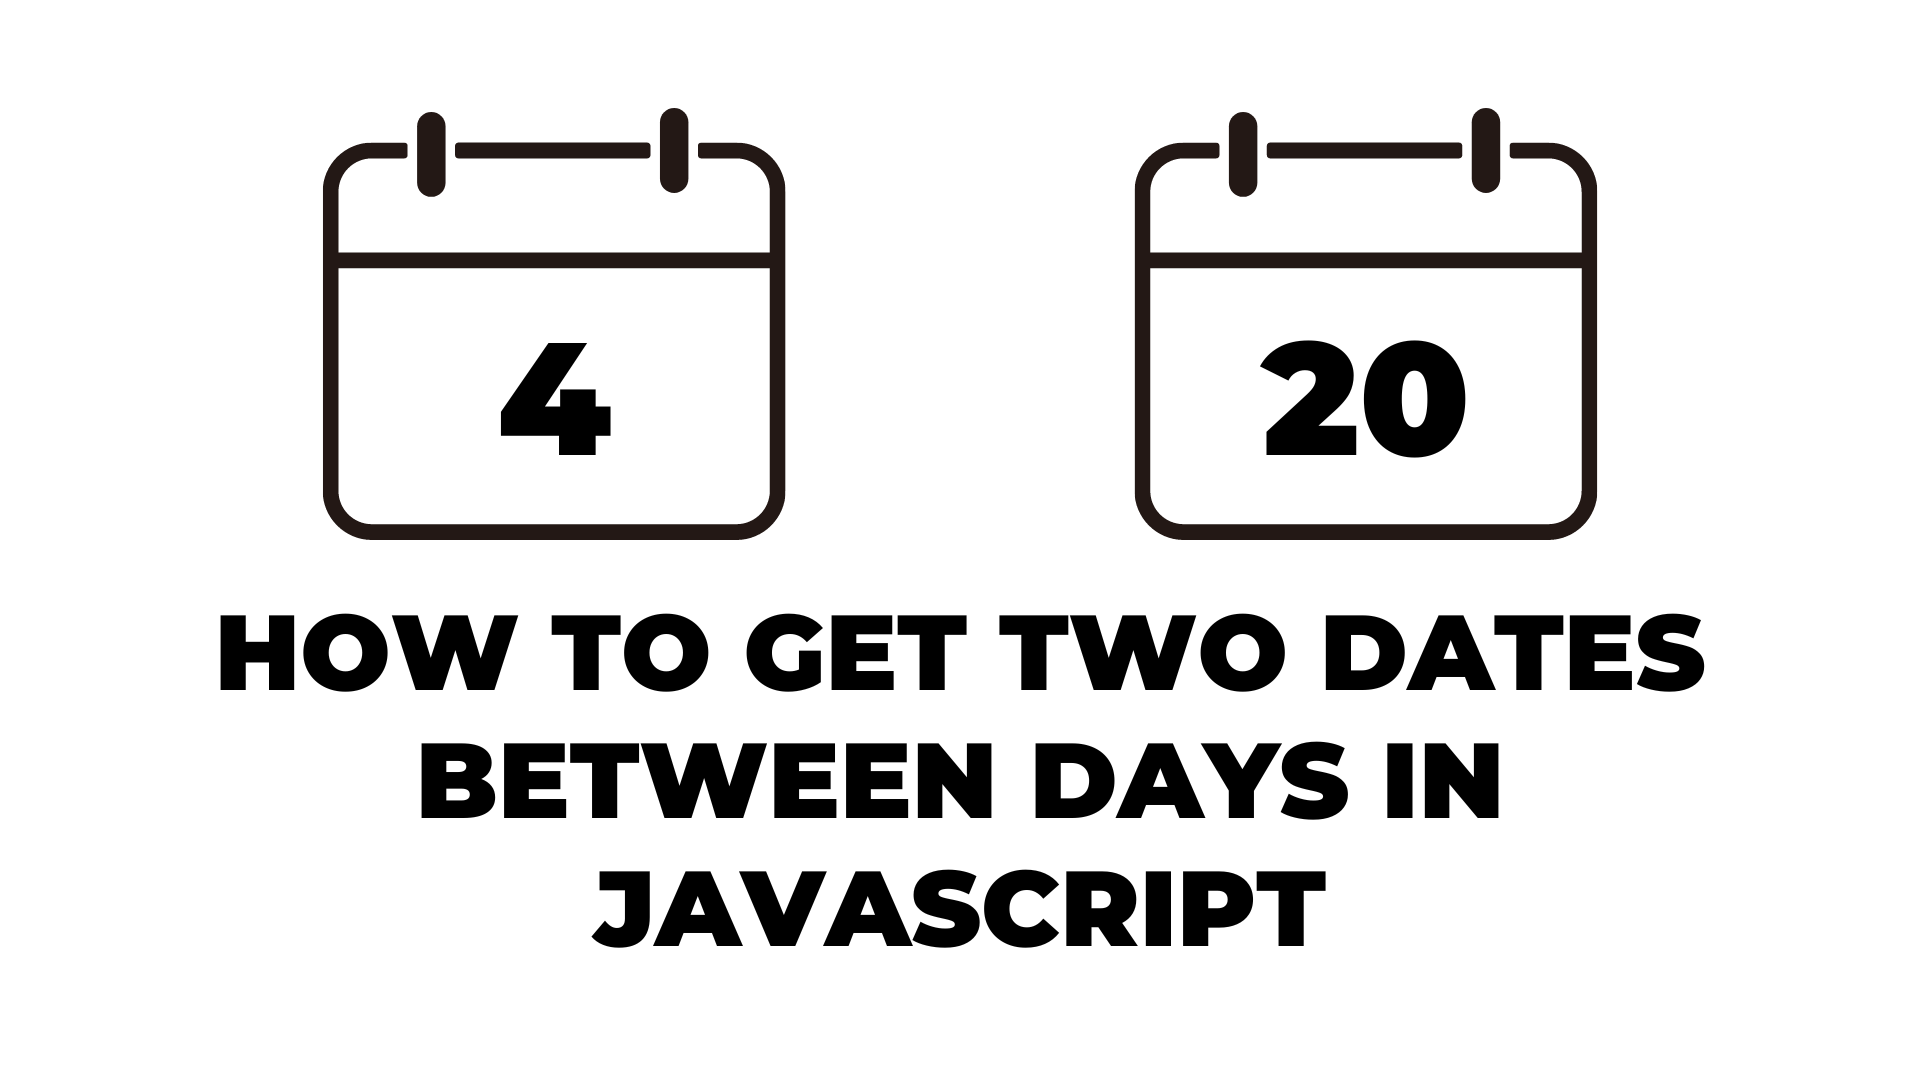 How to get two dates between days in JavaScript